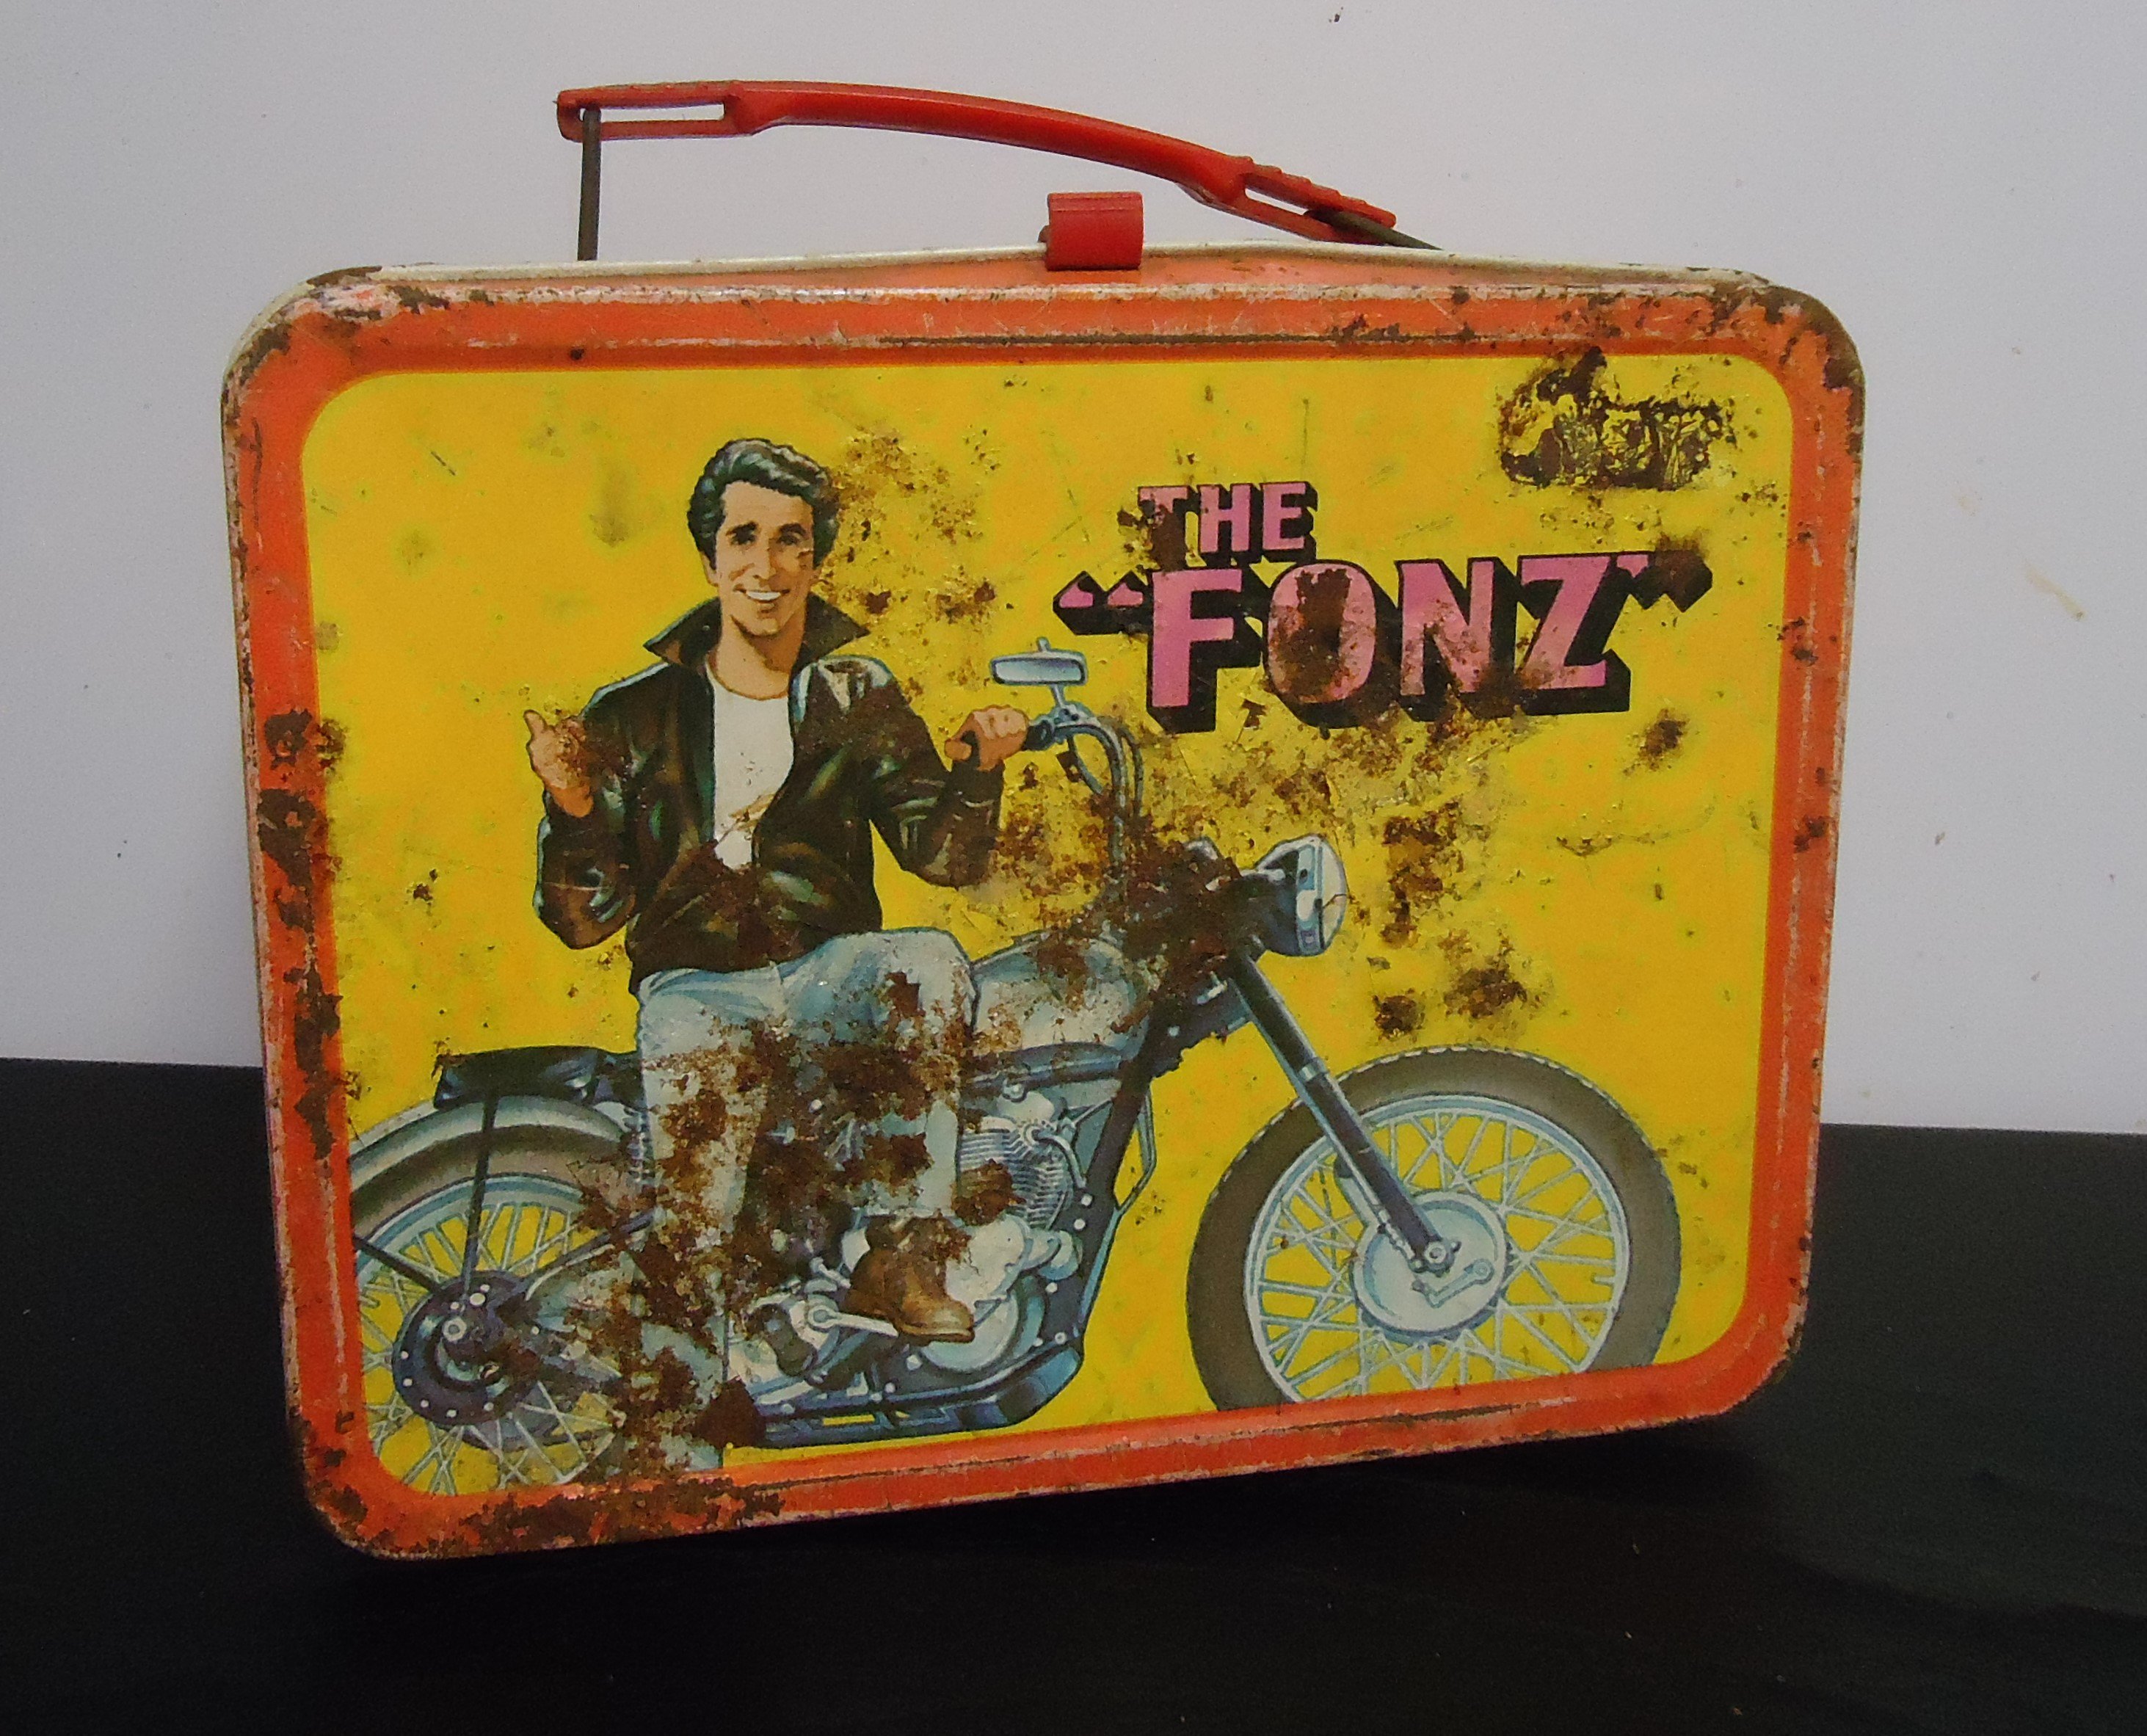 (19) "Happy Days" (The Fonz)
Metal Lunch Box W/Out Thermos
$38.00